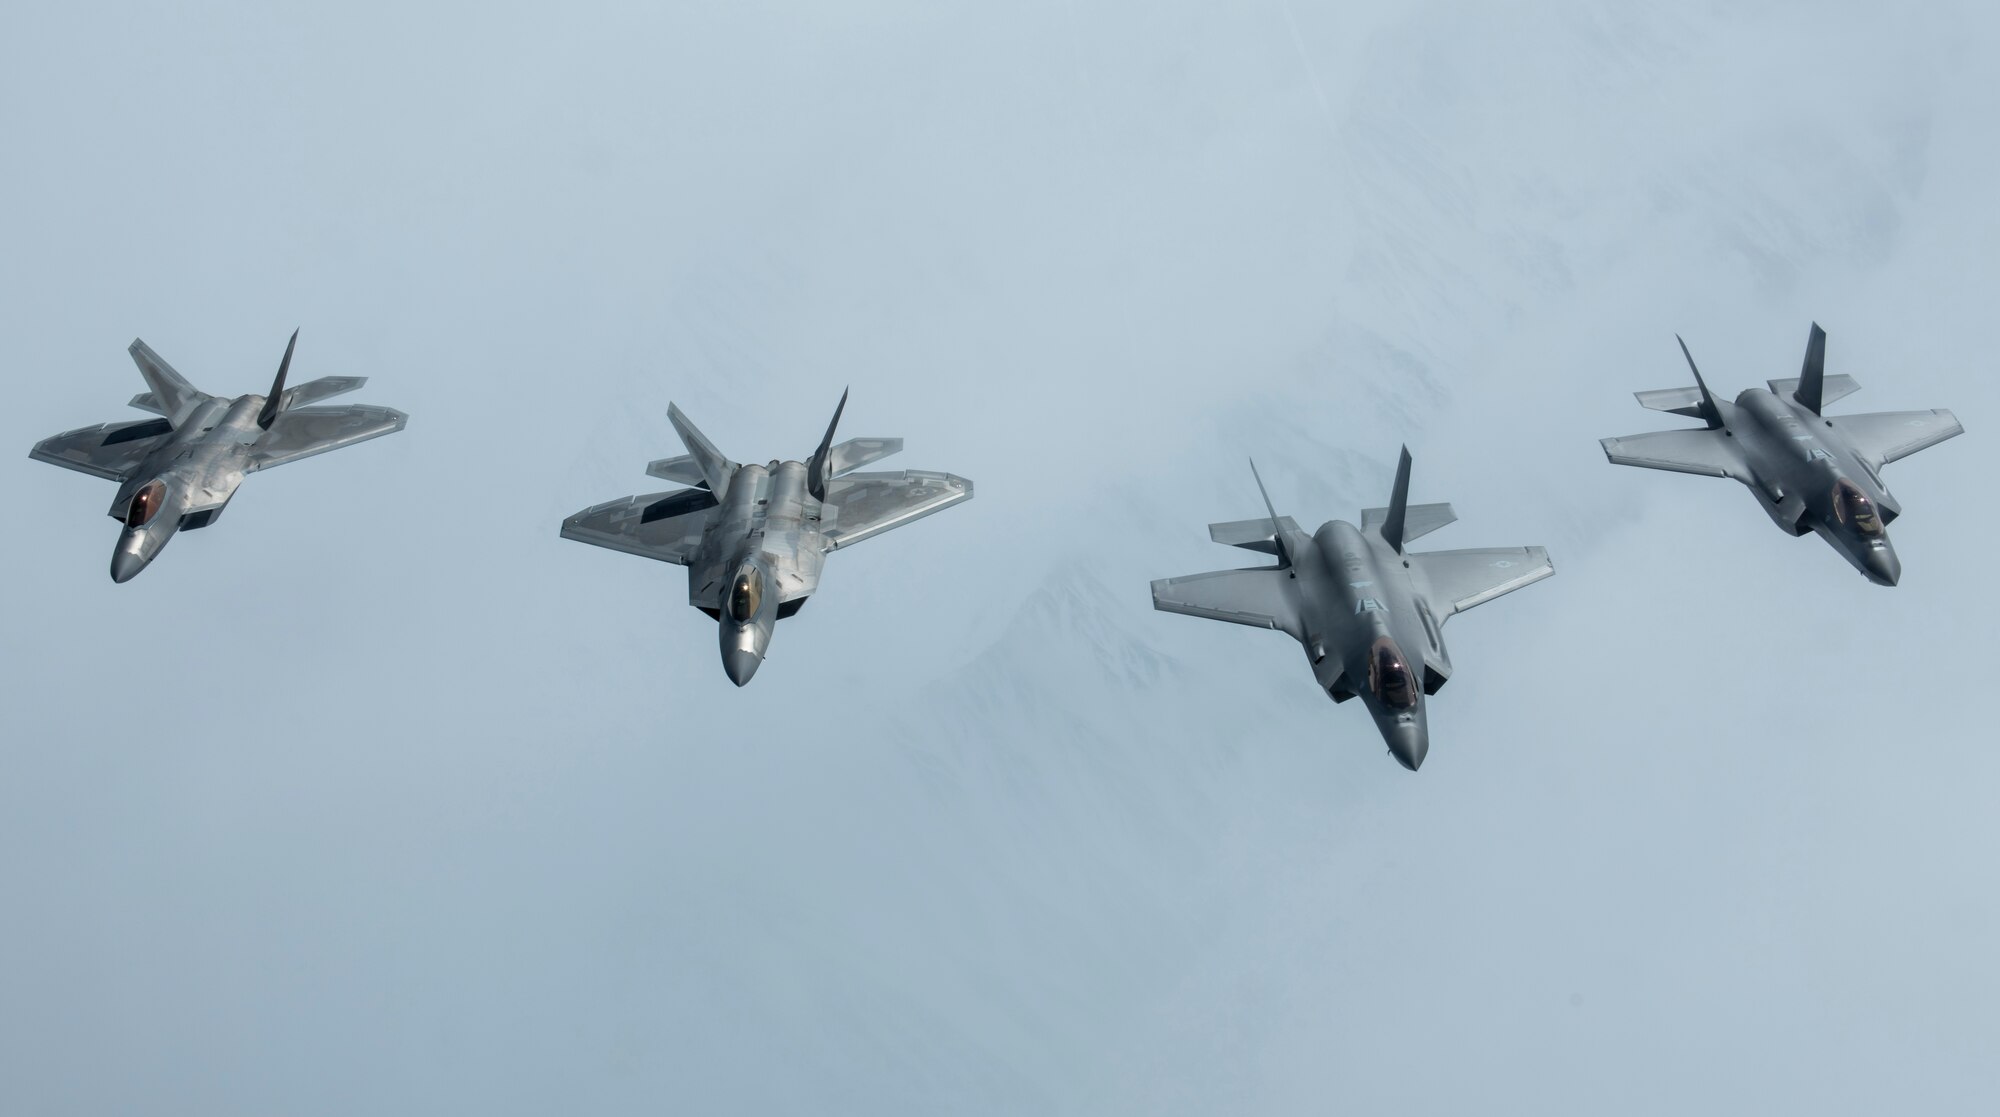 Two F-35A Lightning II aircraft, newly assigned to Eielson Air Force Base, Alaska, and two F-22 Raptors from Joint Base Elmendorf-Richardson, Alaska, fly in formation over the Alaska Range, April 21, 2020.